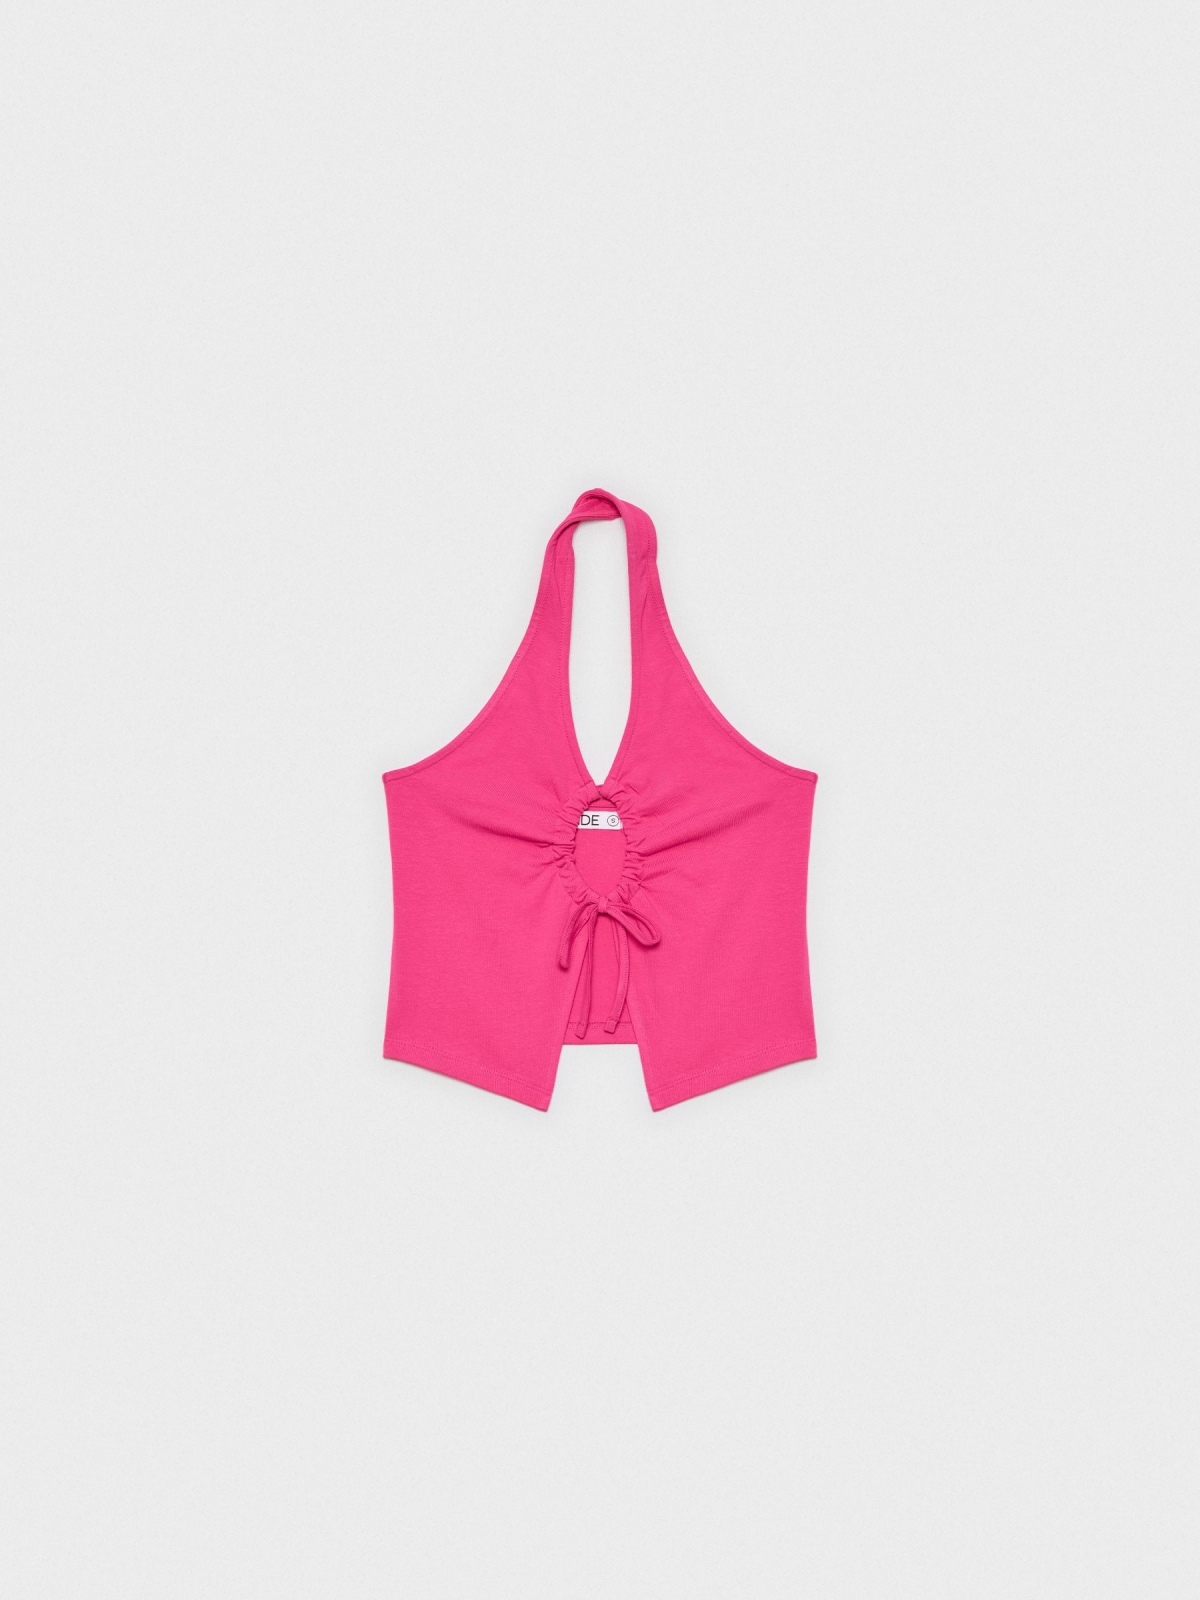  Top cut out knotted magenta